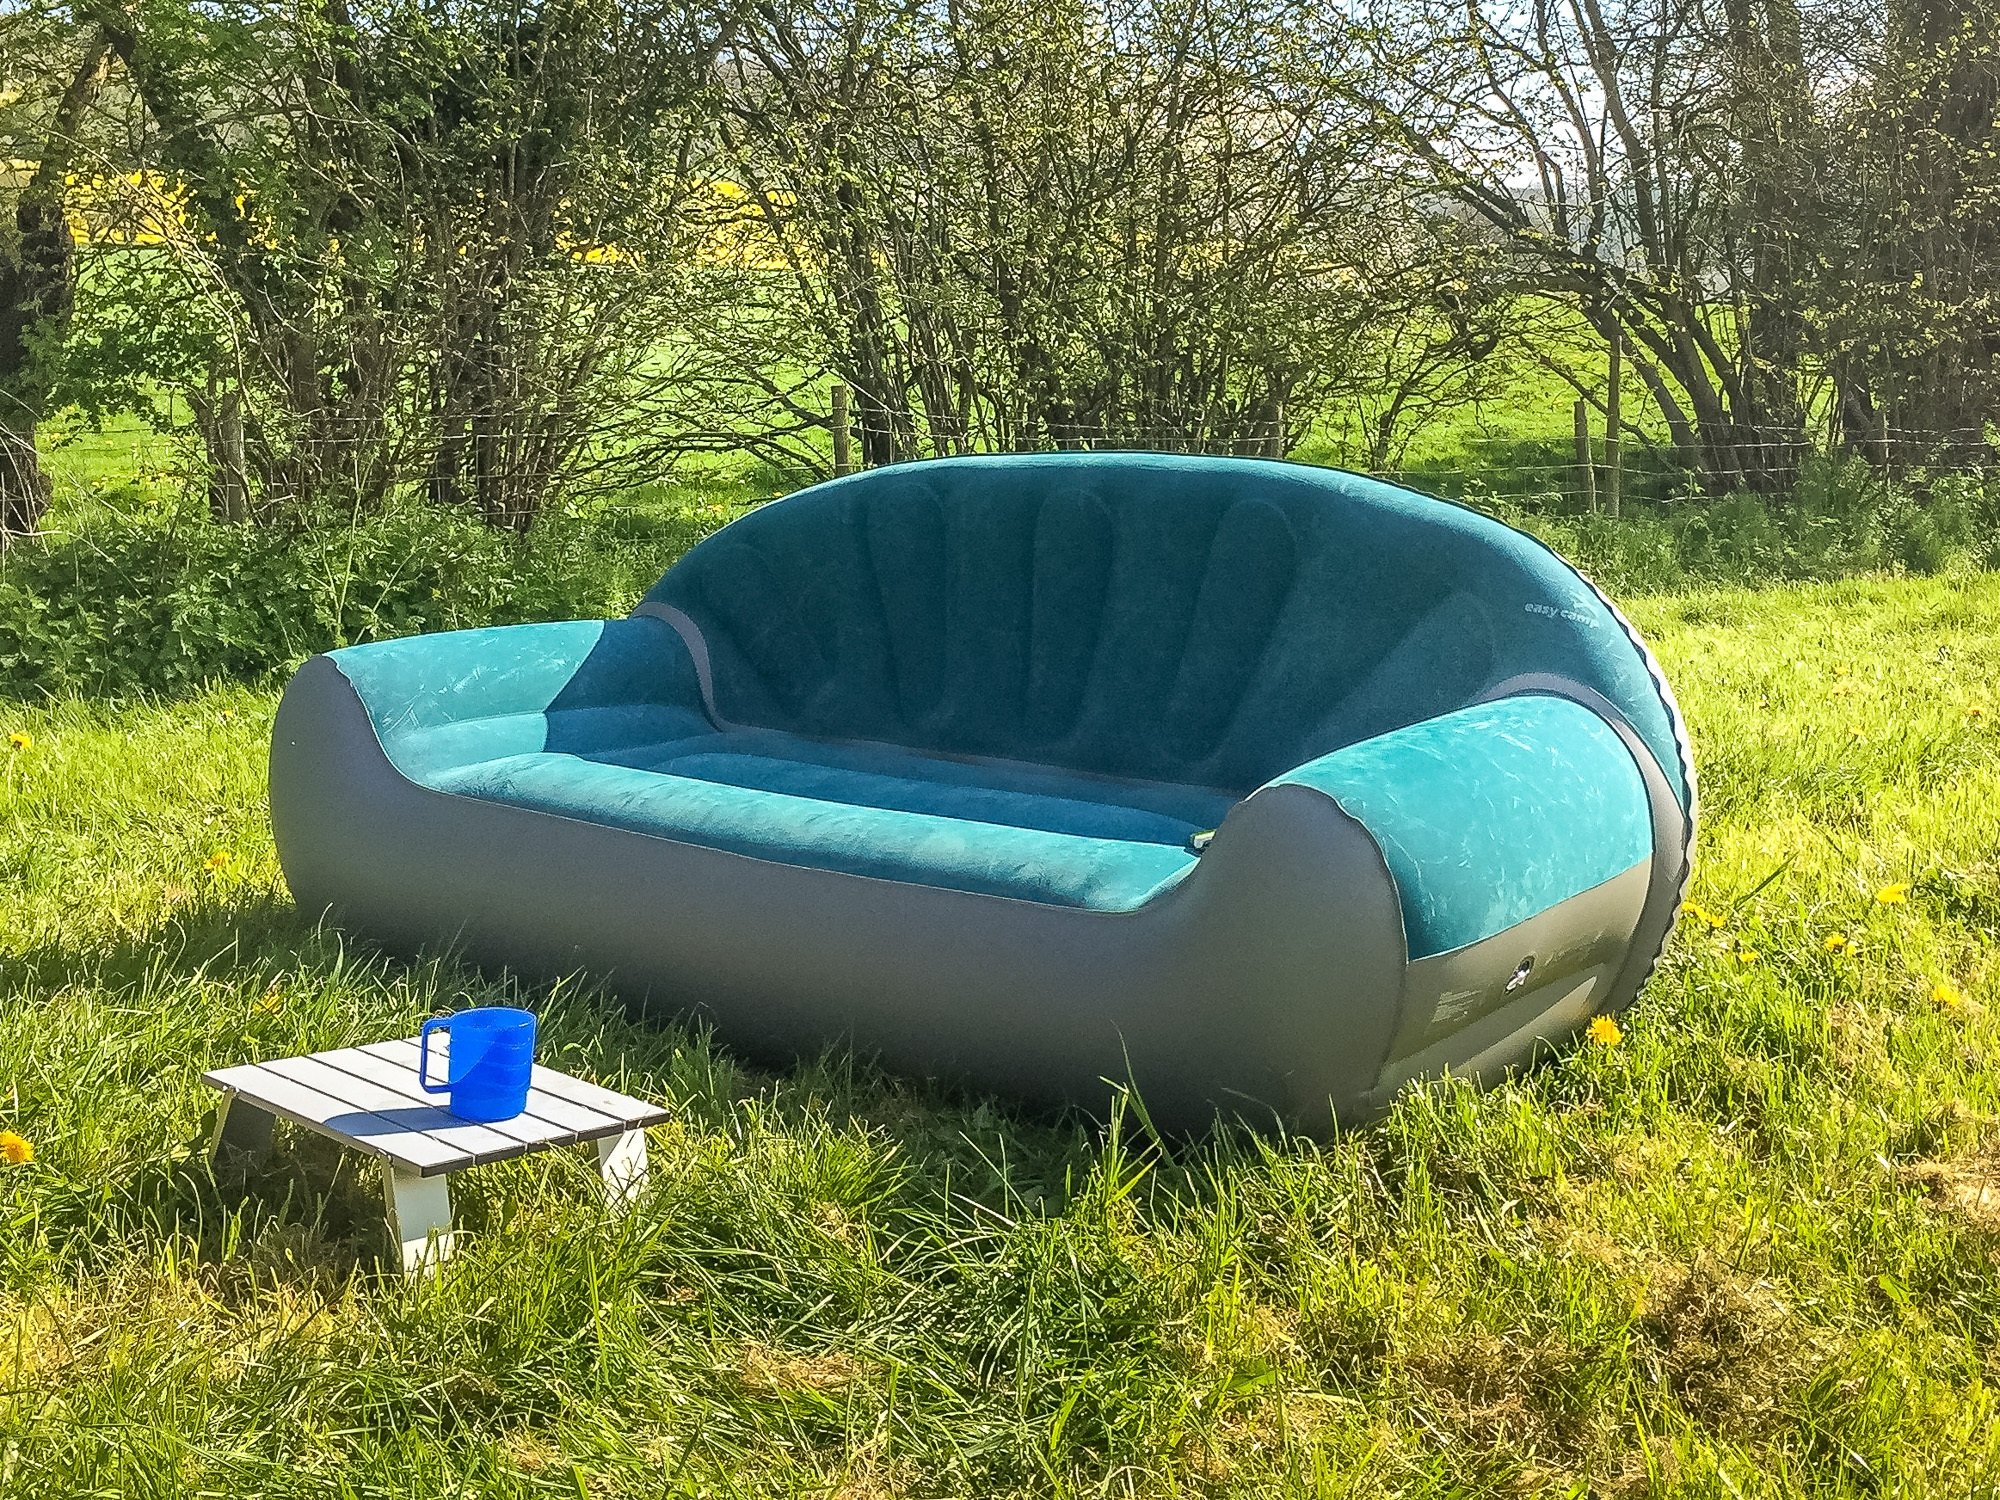 The inflatable Easy Camp Comfy Sofa at the campsite